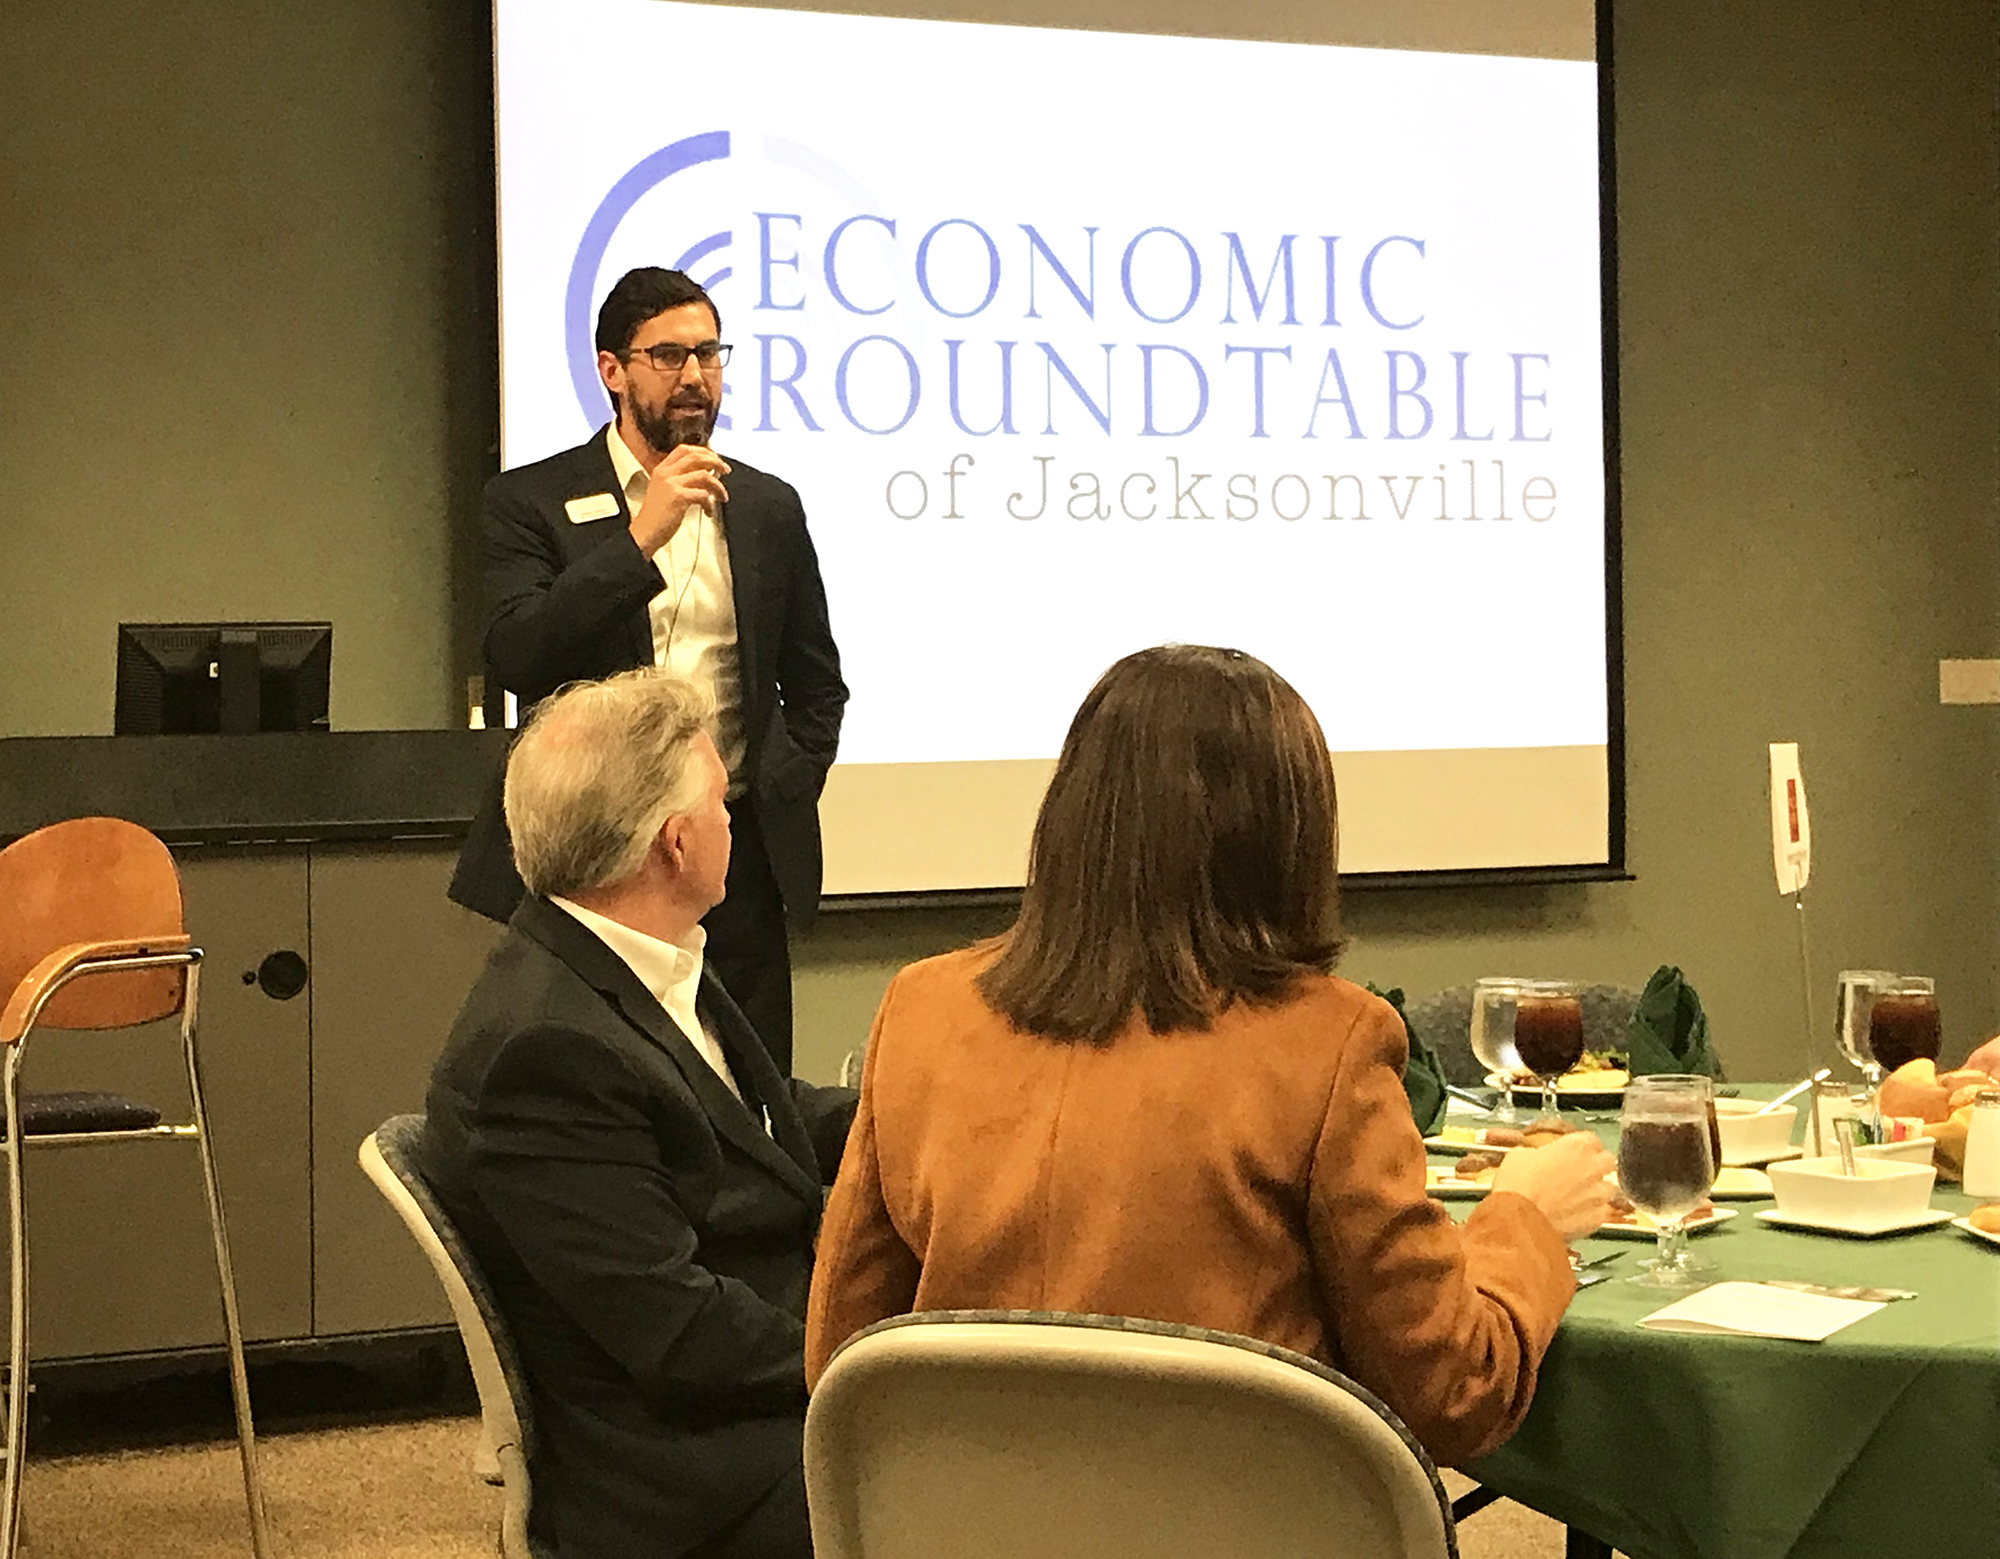 Daniel Gilham, president of the Economic Roundtable of Jacksonville, speaks at the luncheon Tuesday.